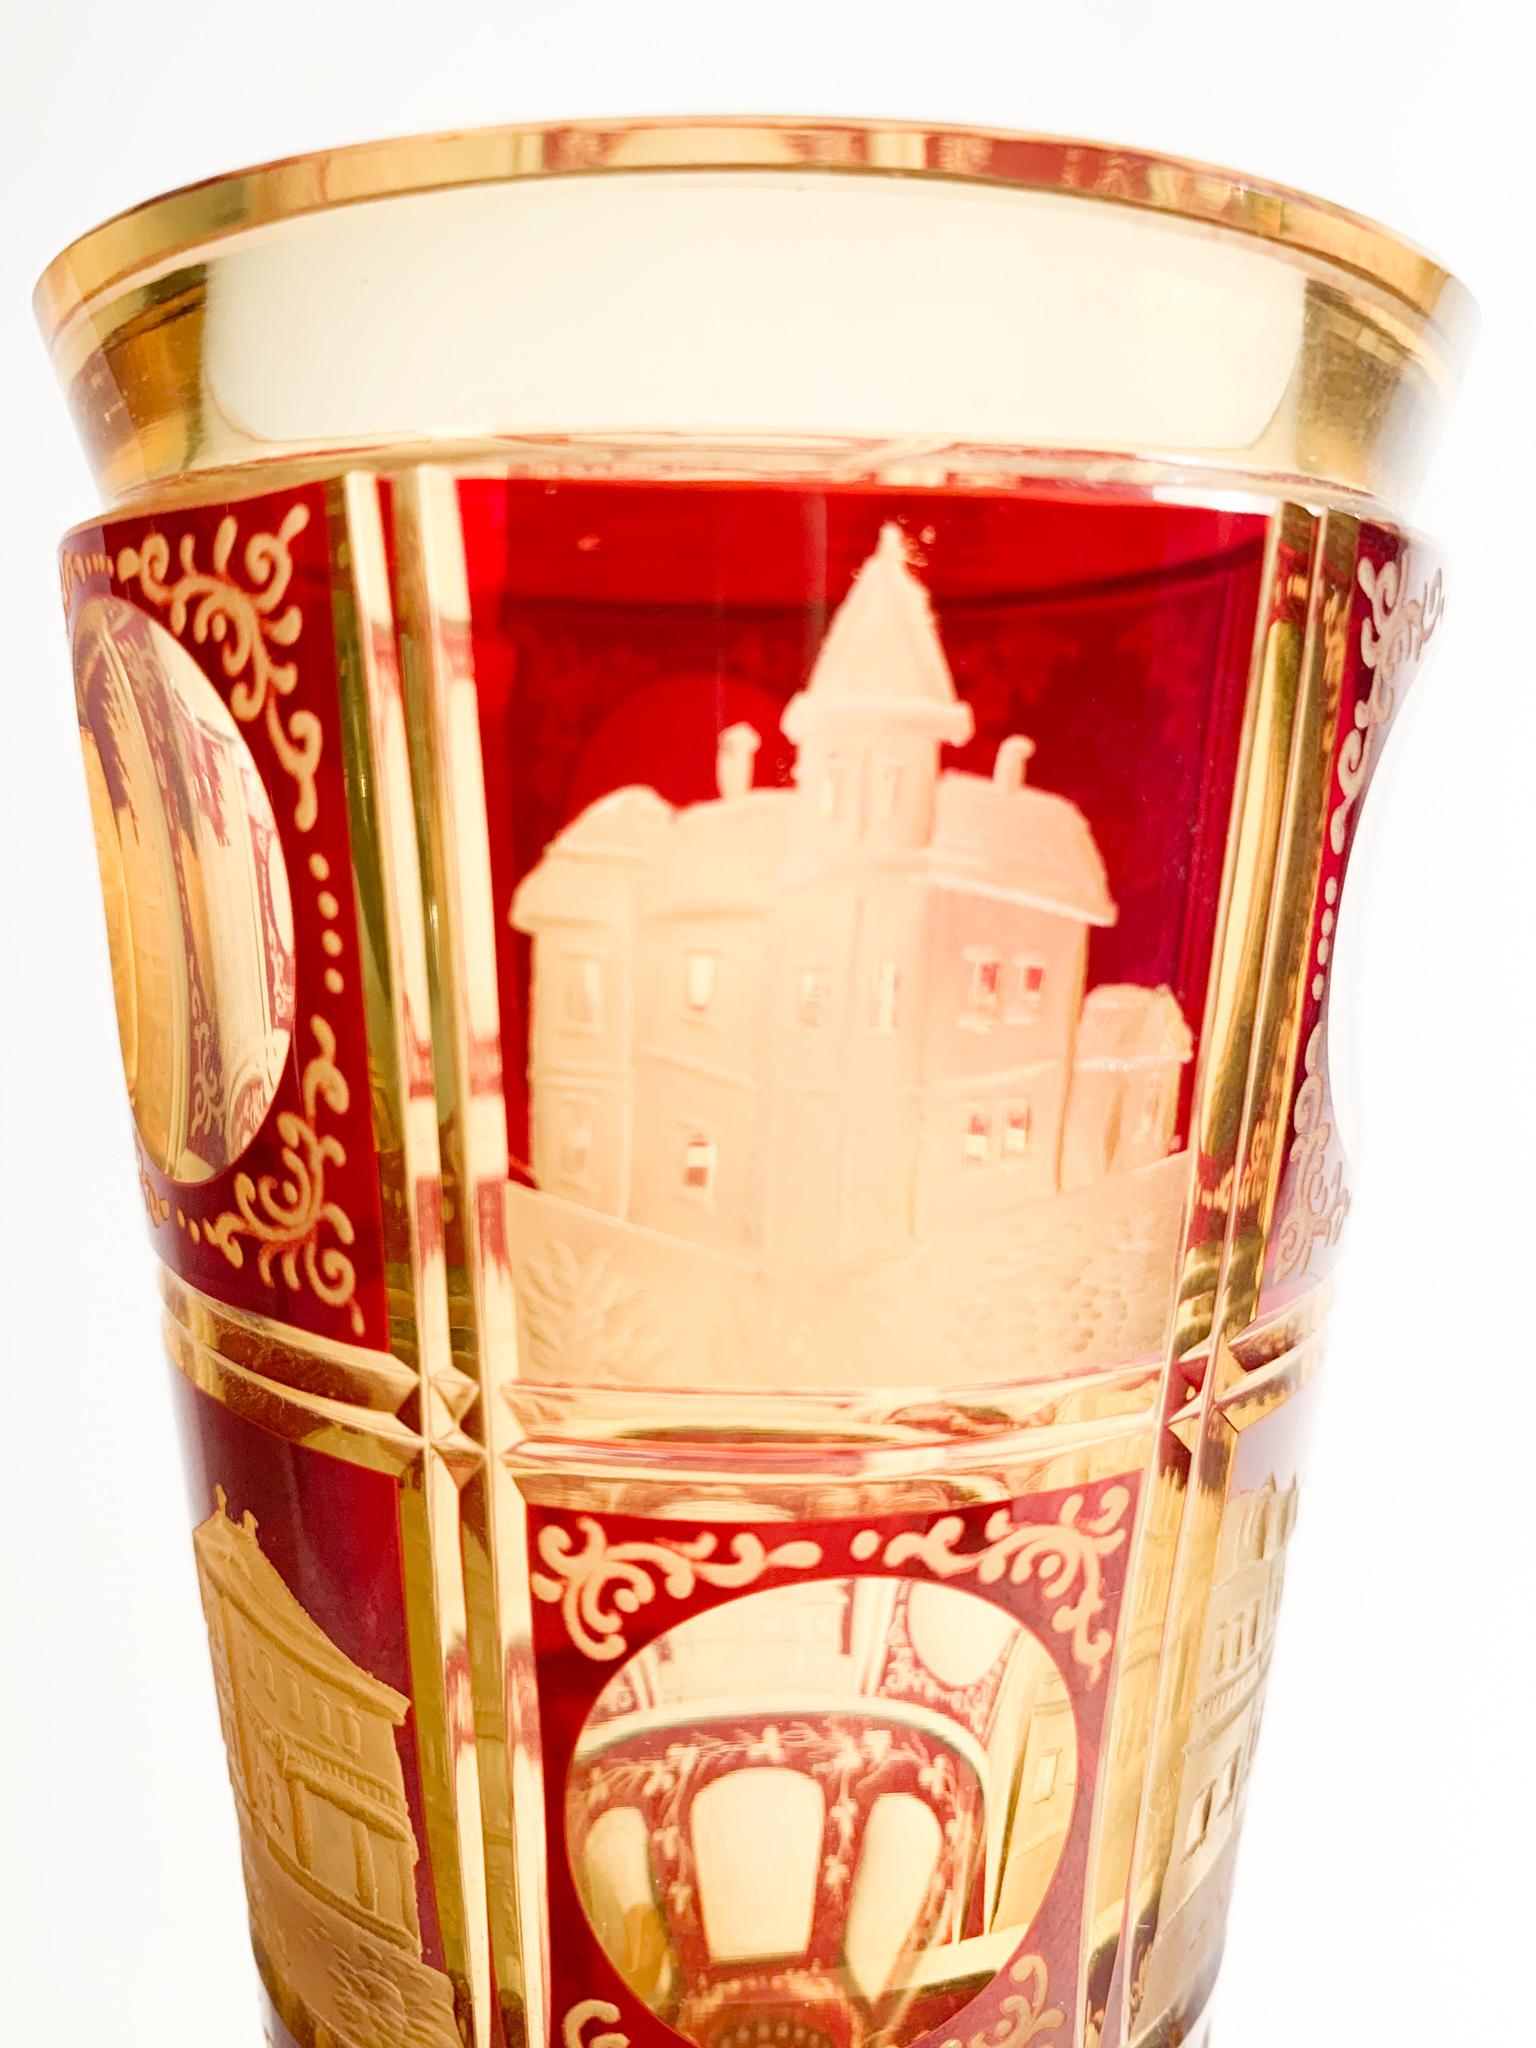 Late 19th Century Glass in Red and Yellow Biedermeier Crystal Decorated with Acid from the 1800s